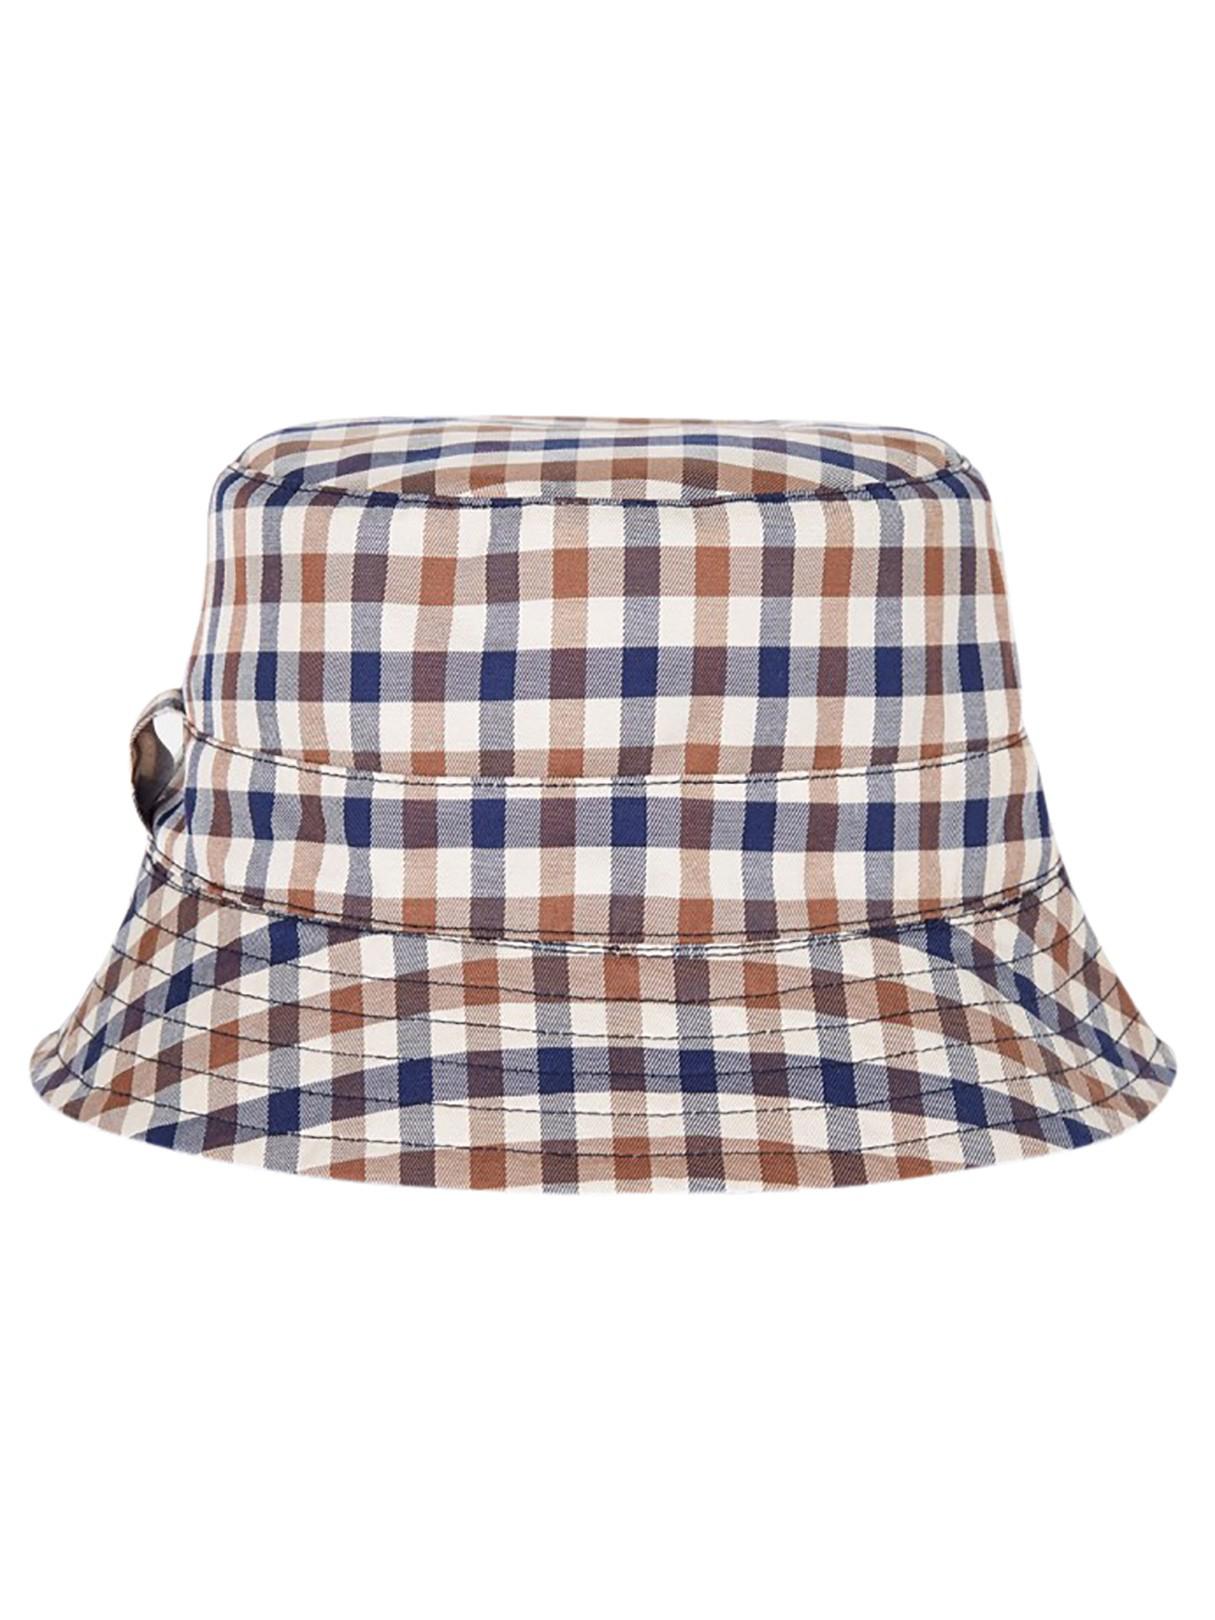 aquascutum bucket hat - OFF-58% >Free Delivery